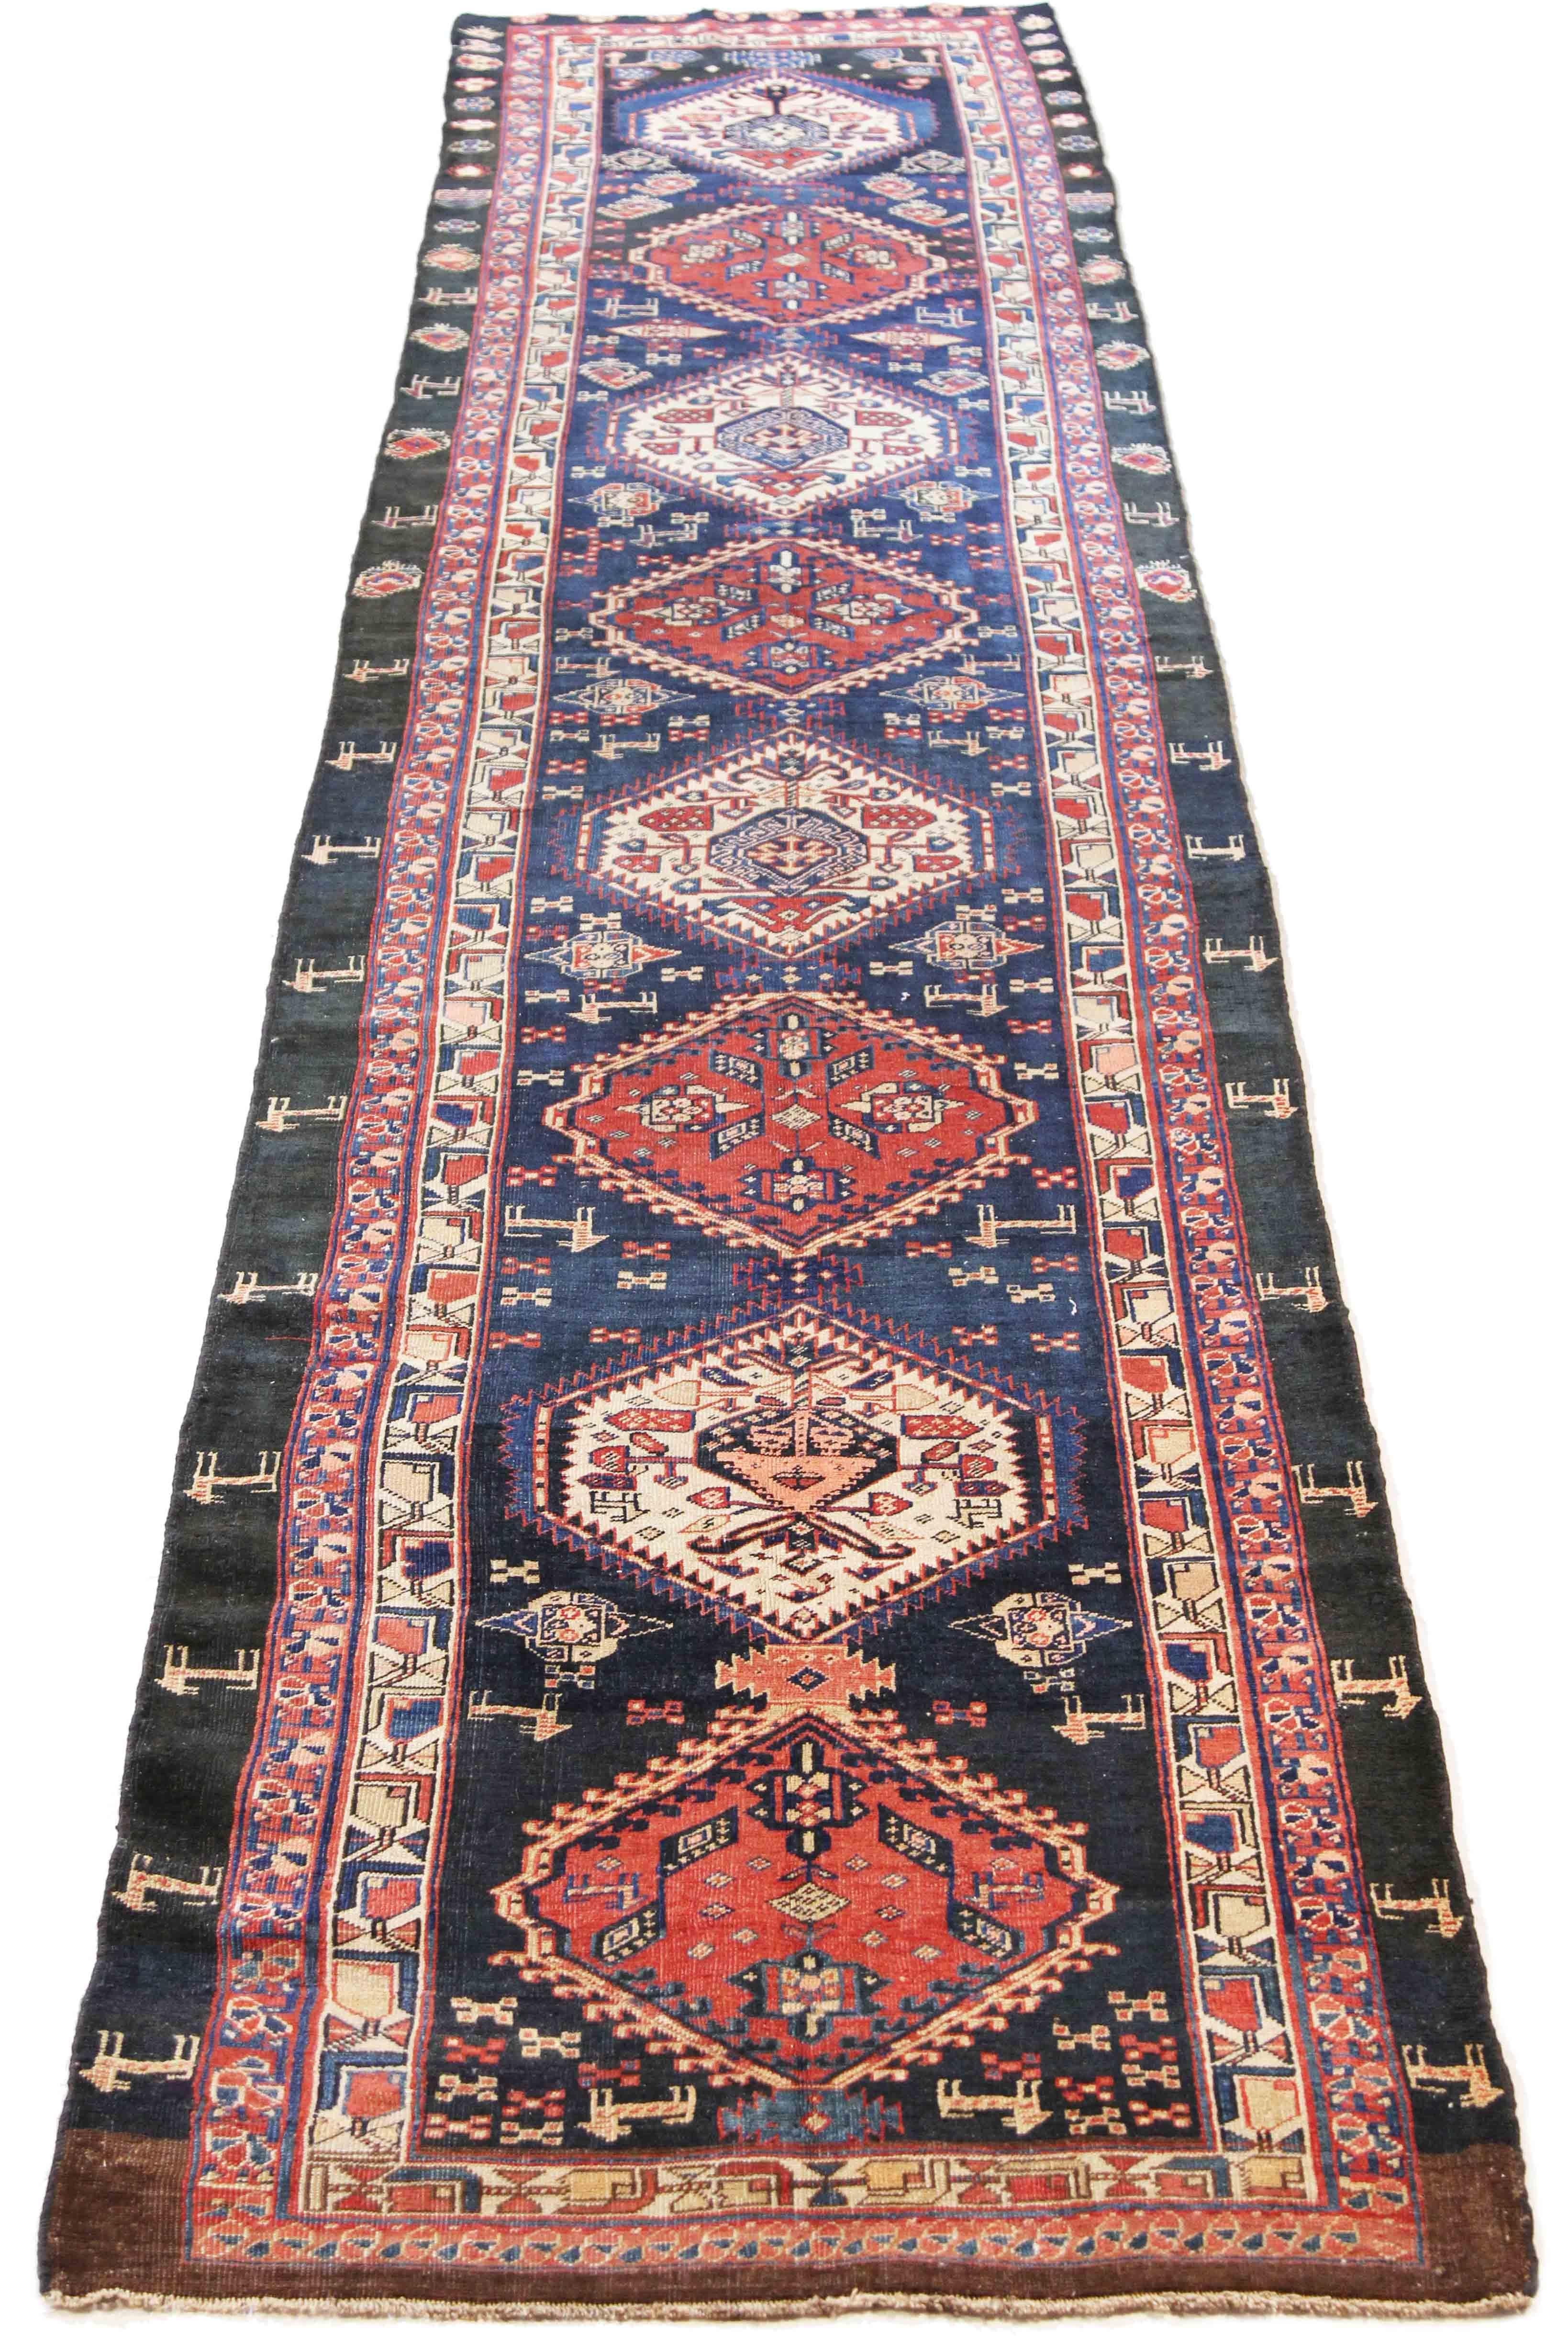 Early 20th Century Antique Persian Rug Azerbaijan Design with Magnificent Jewel Patterns circa 1900 For Sale